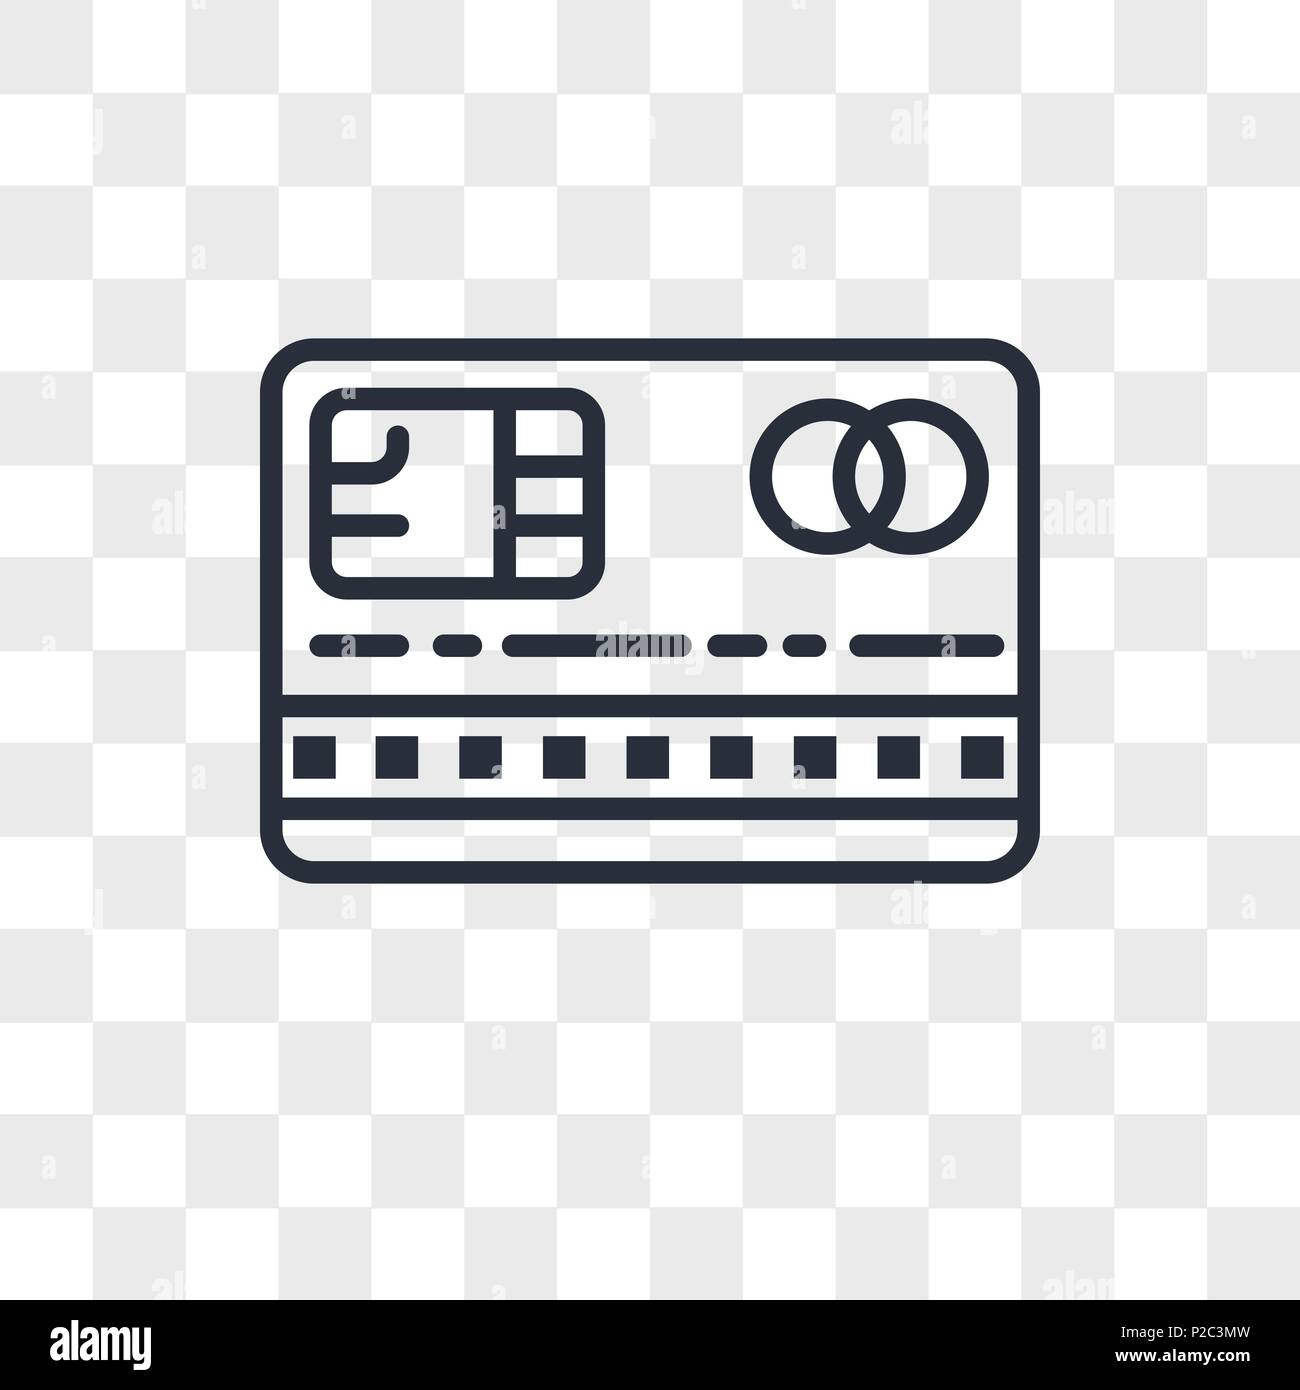 Cit card vector icon isolated on transparent background, Cit card logo concept Stock Vector